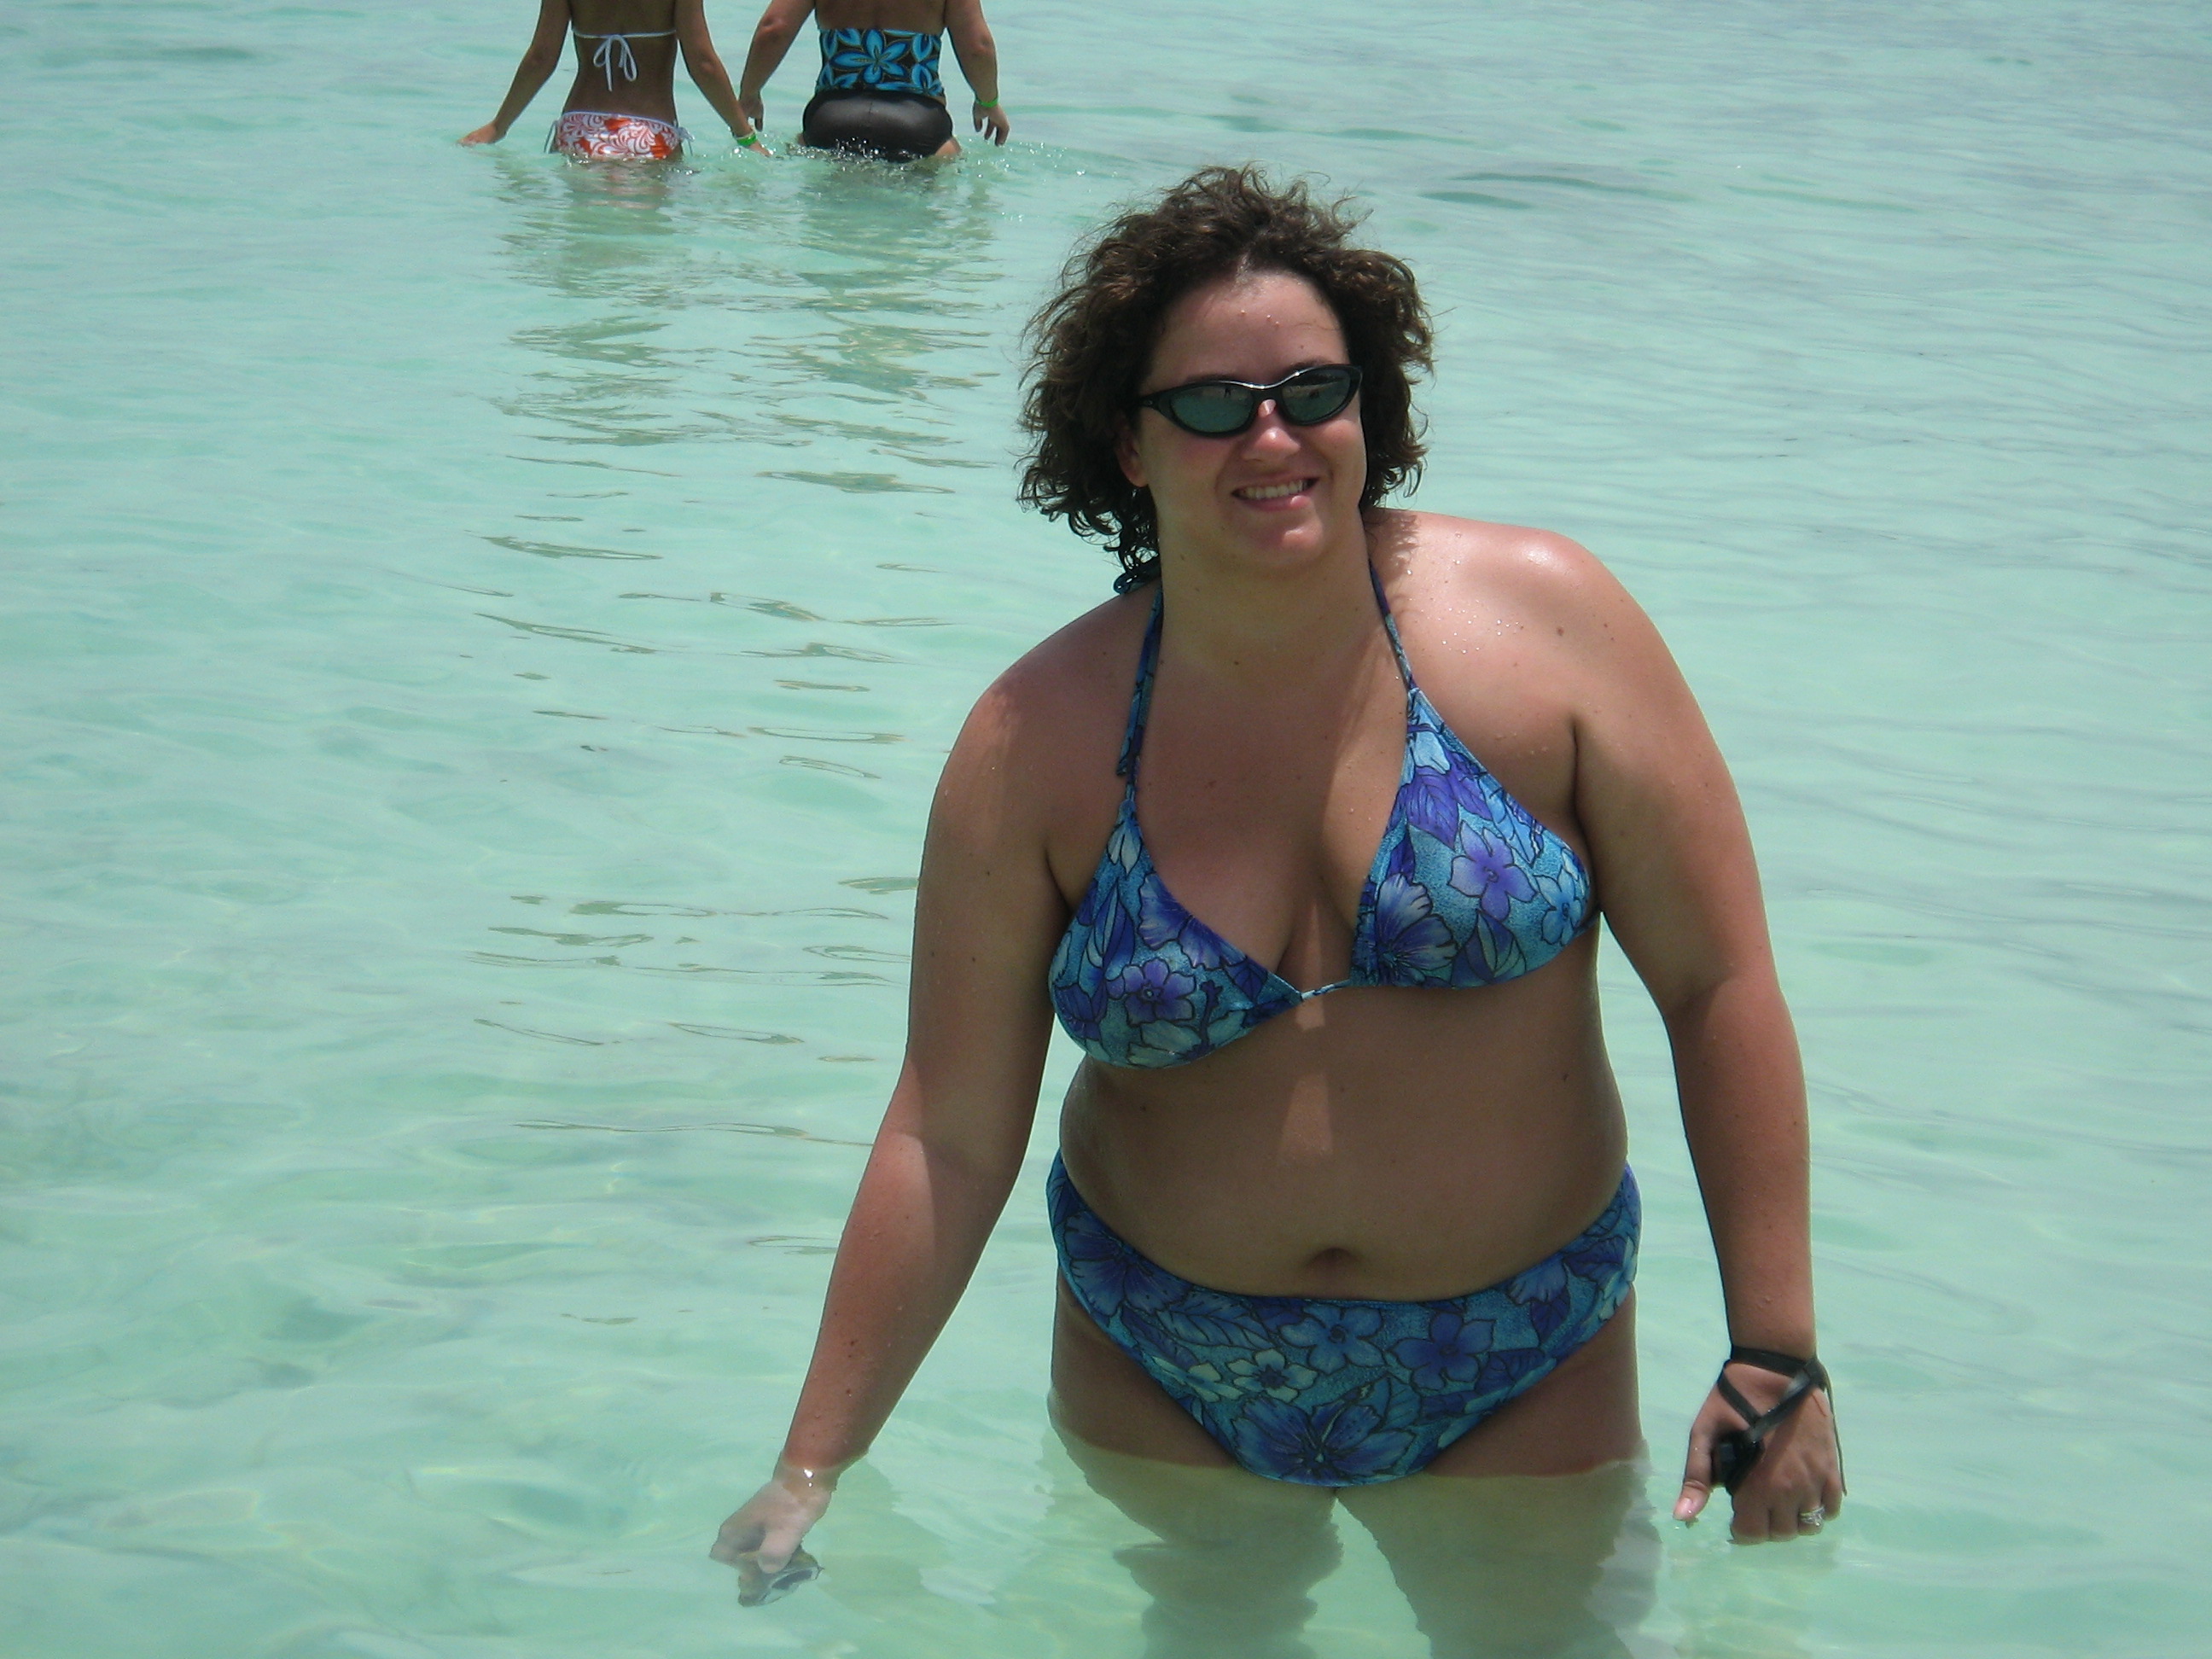 Katie in the water at Saona Island